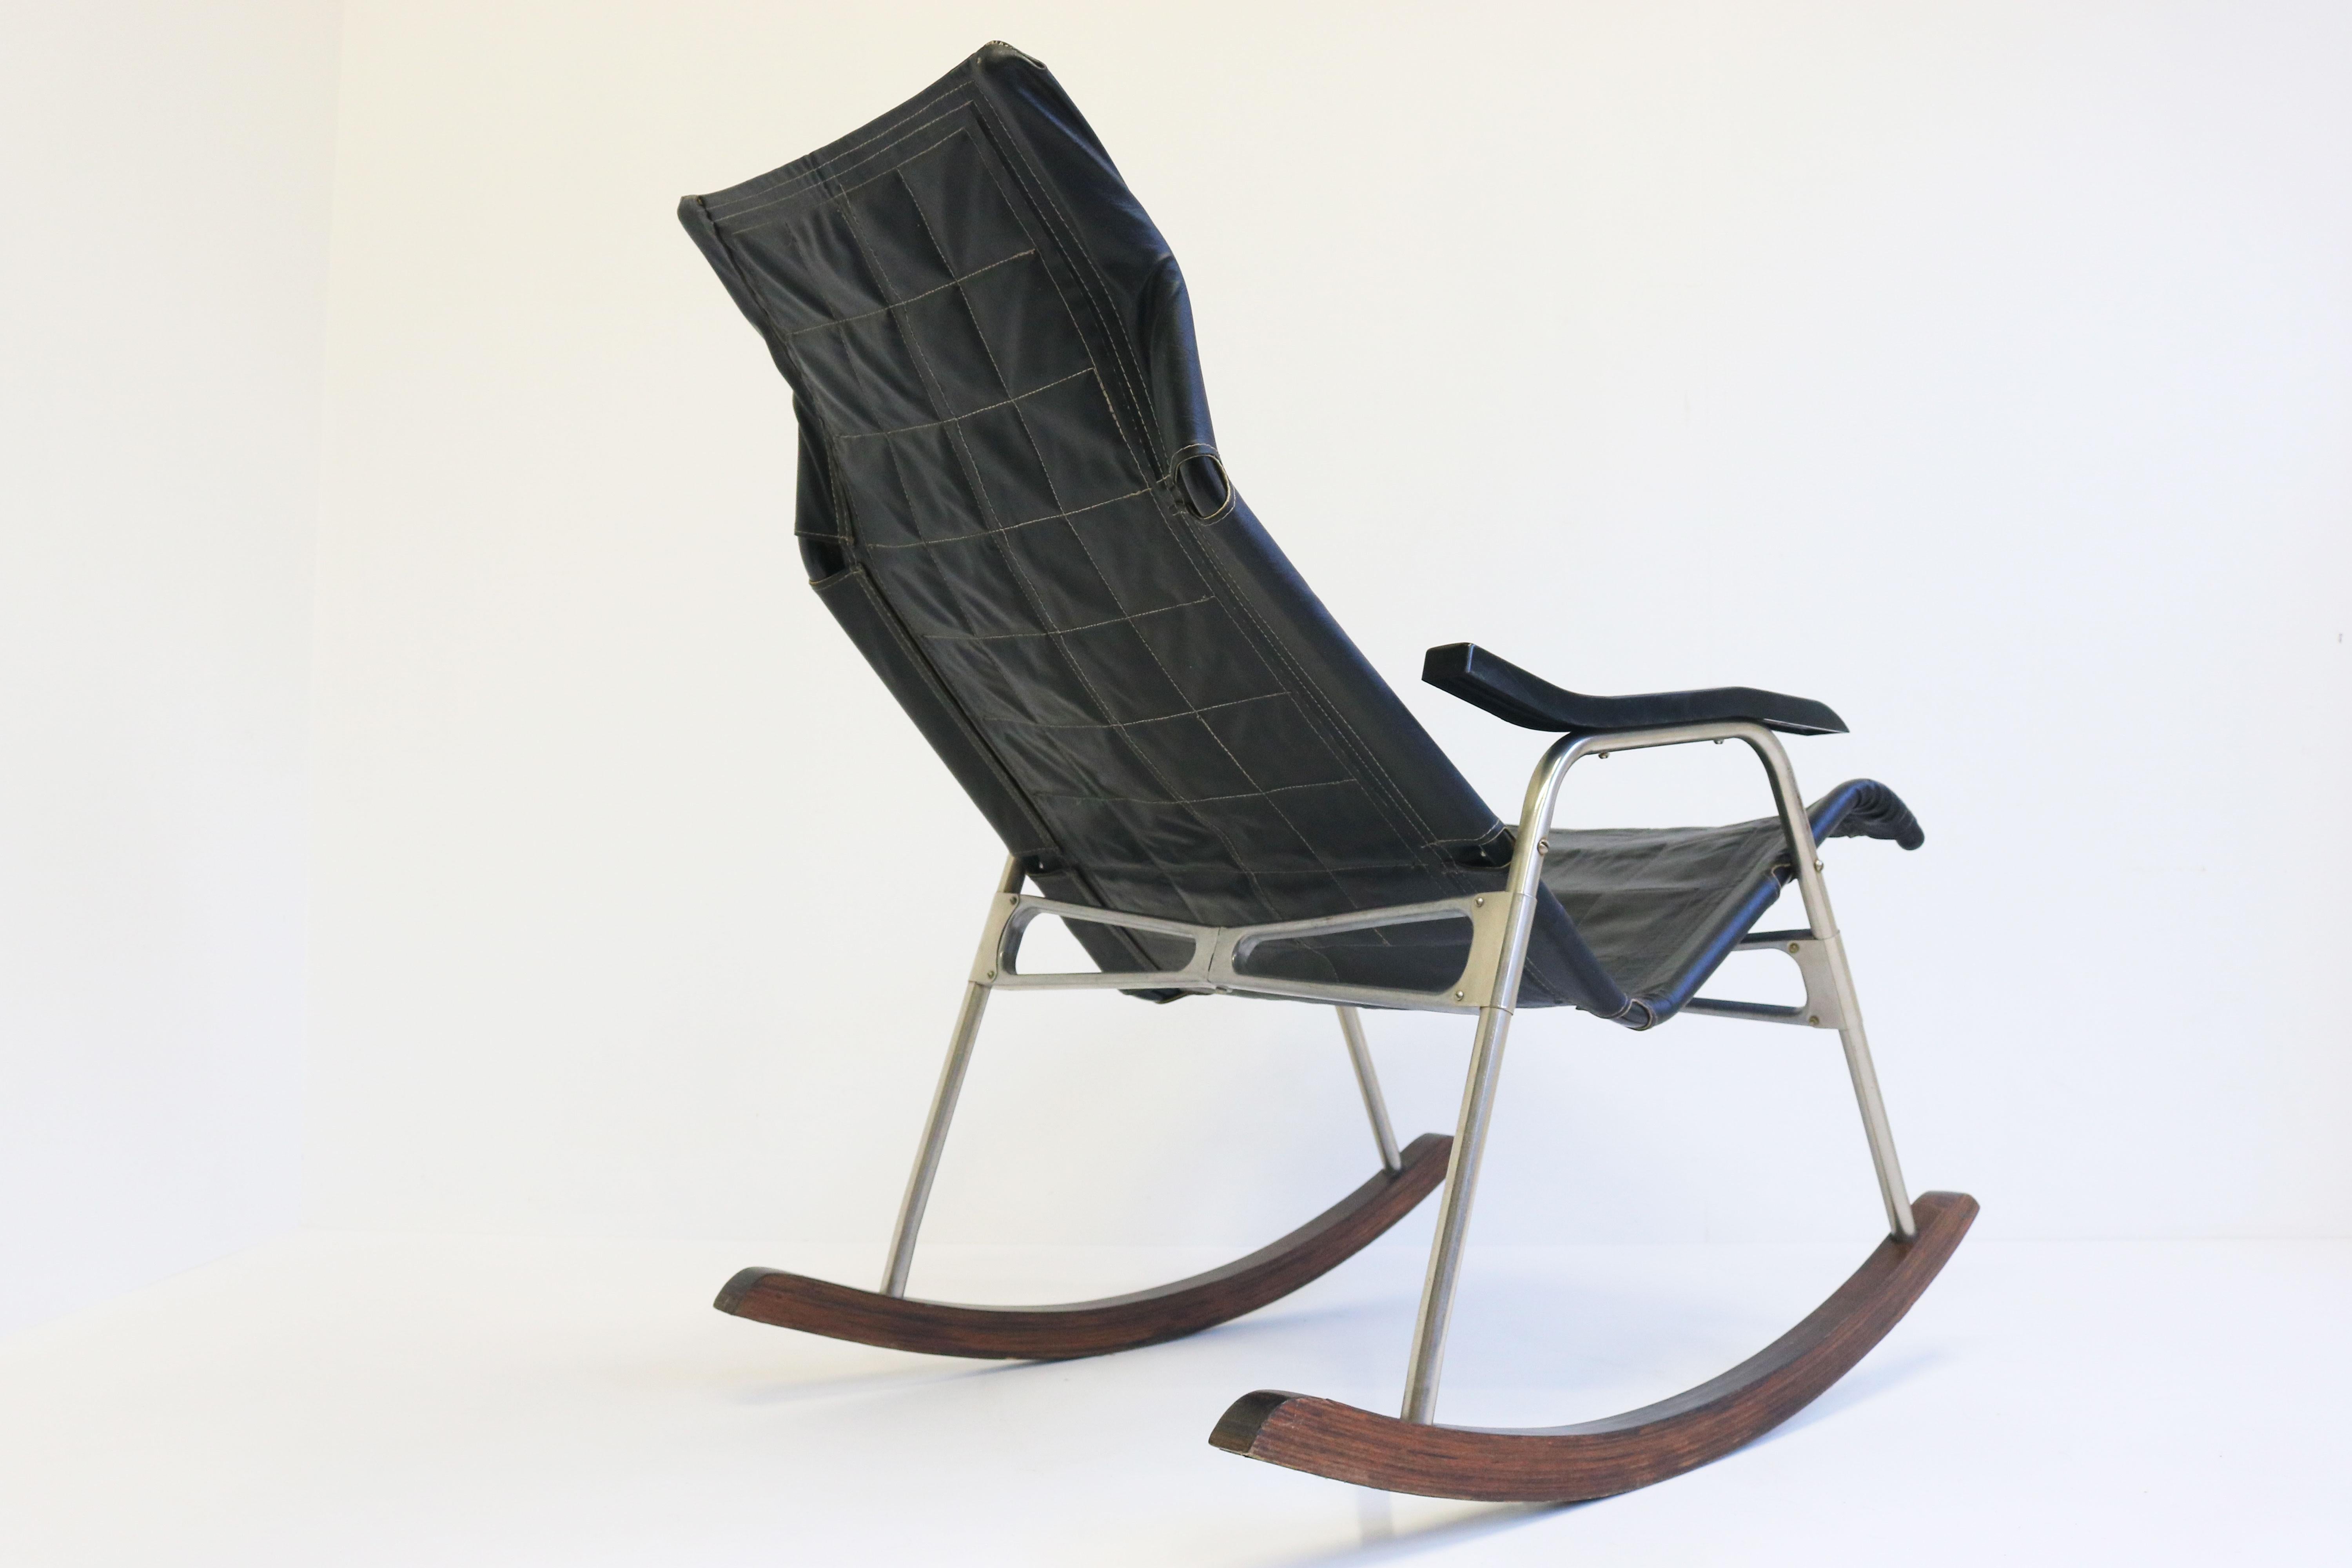 Introducing a stunning and iconic piece of mid-century modern furniture: this black leather rocking chair by Takeshi Nii, designed in 1960 in Japan.
Crafted from premium black leather and chrome metal frame, this sleek and elegant rocking chair